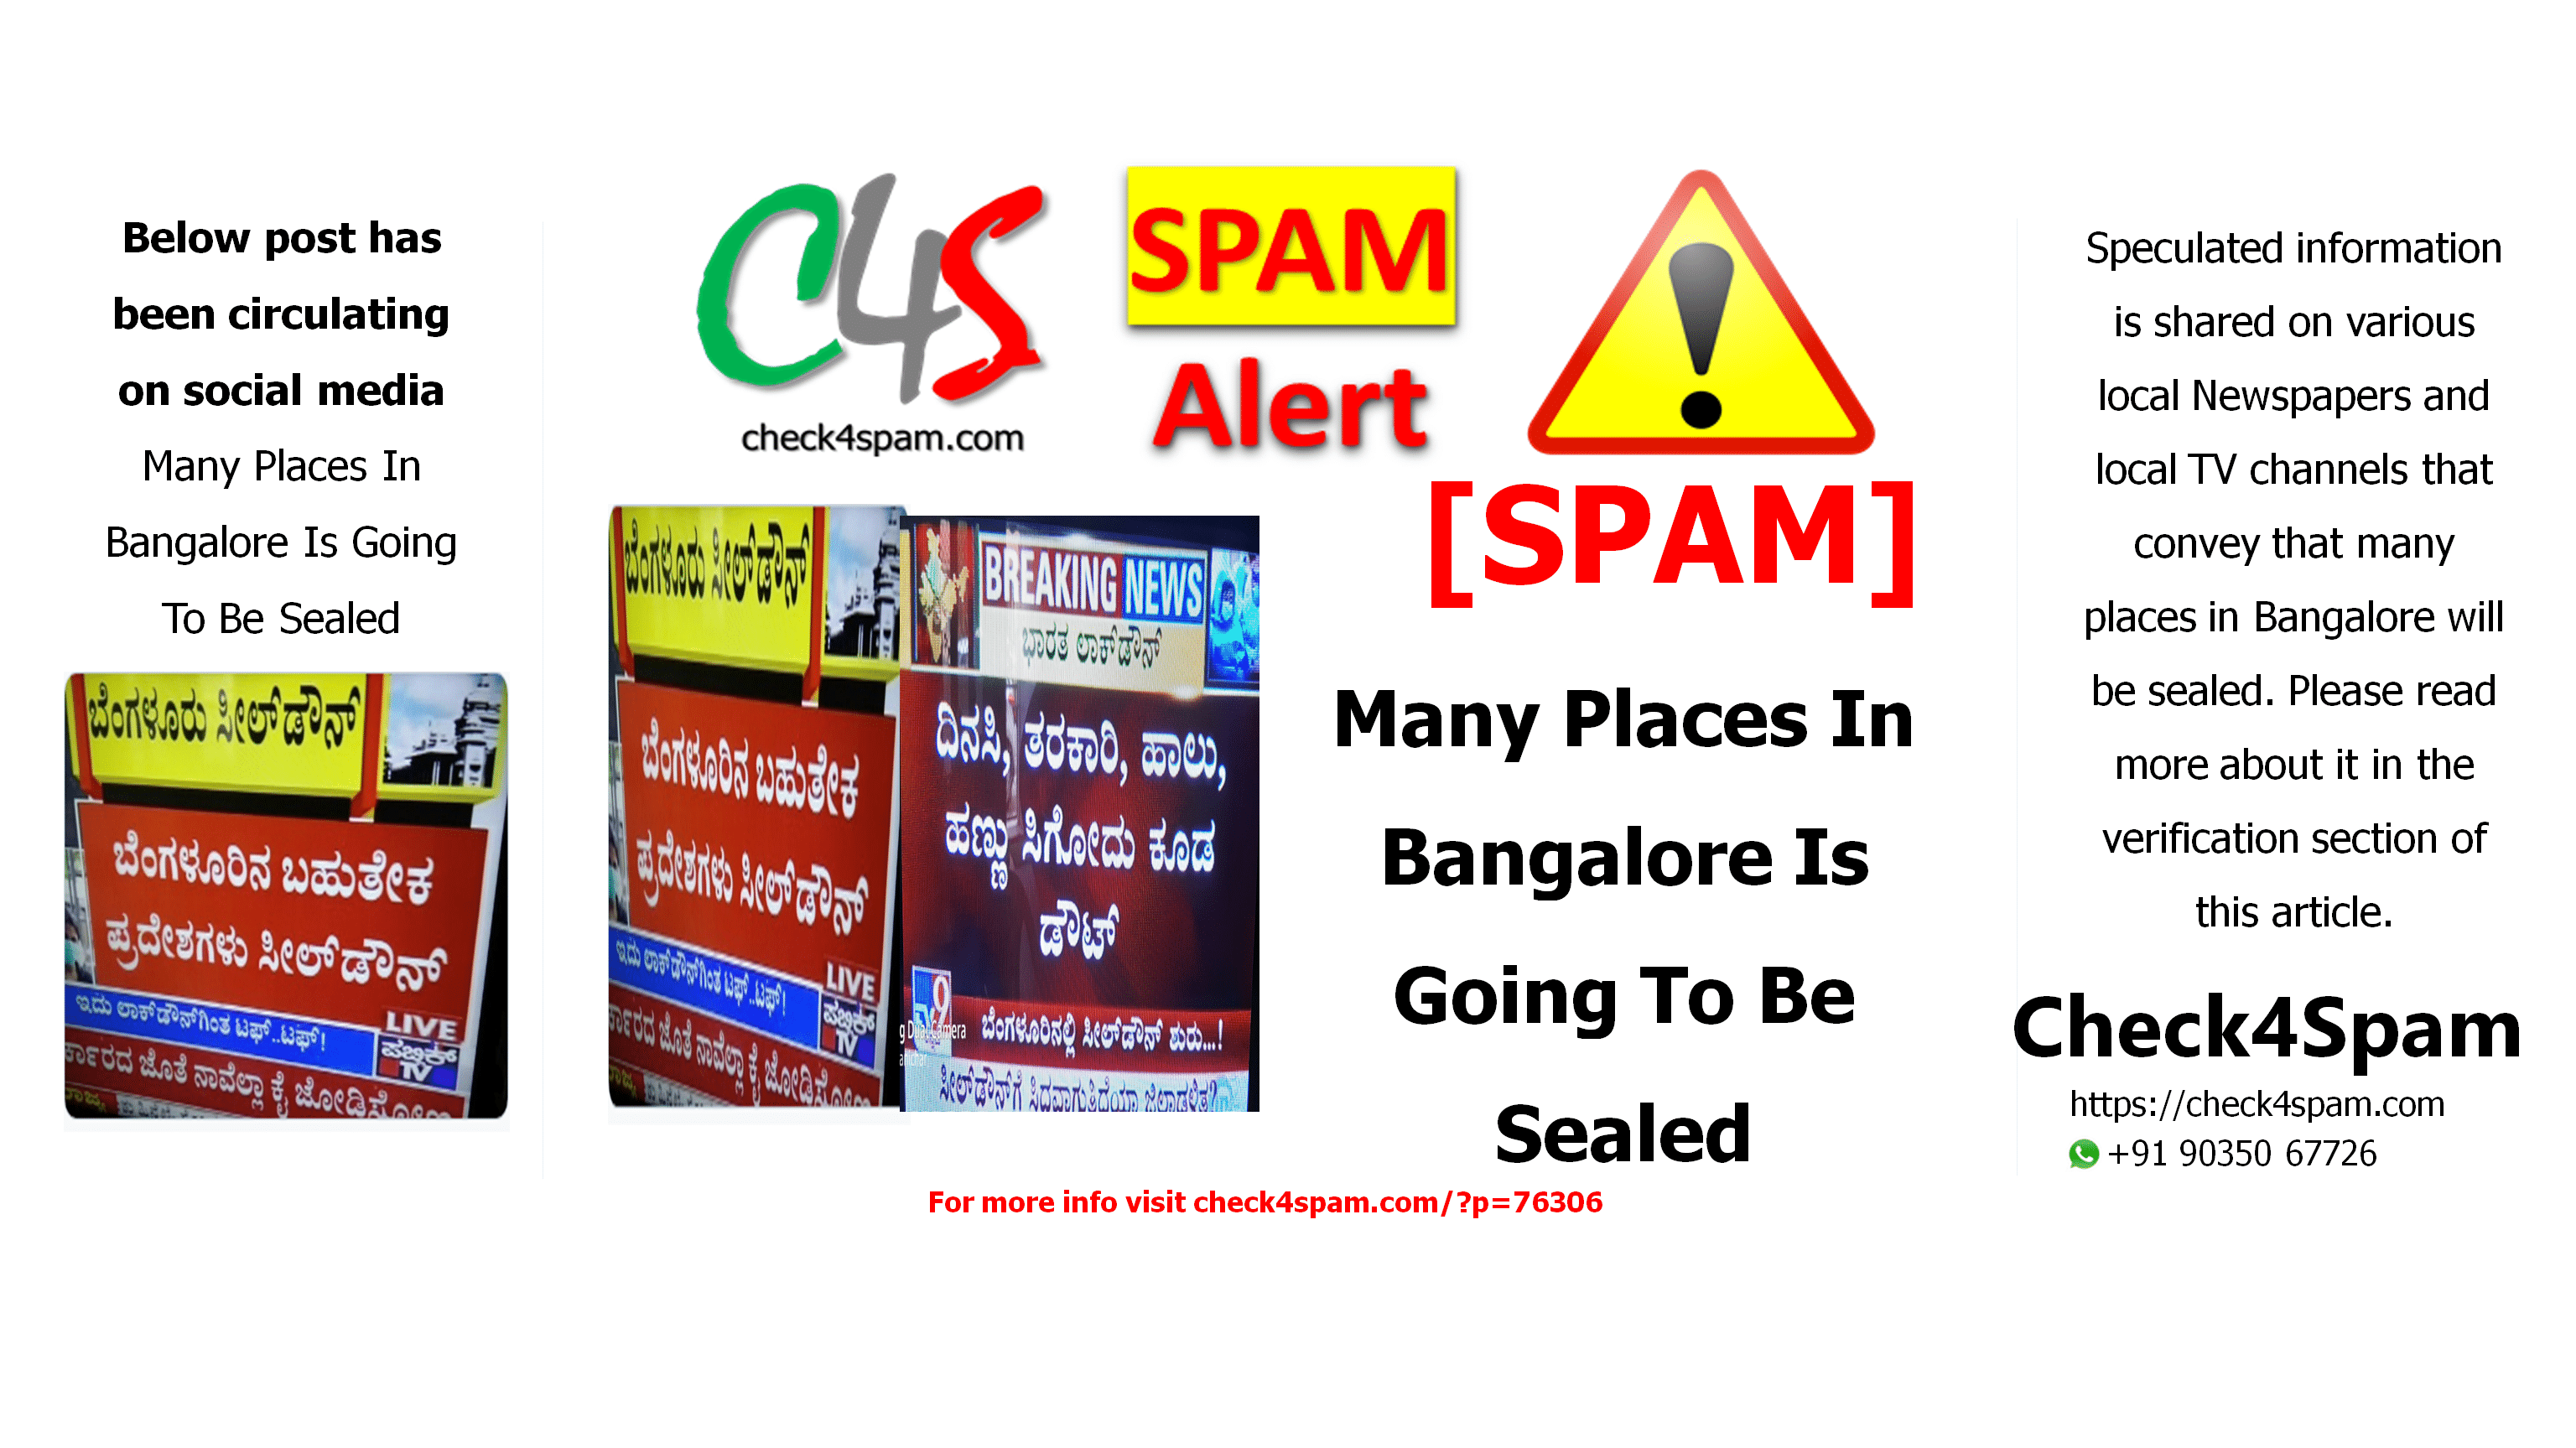 Many Places In Bangalore Is Going To Be Sealed